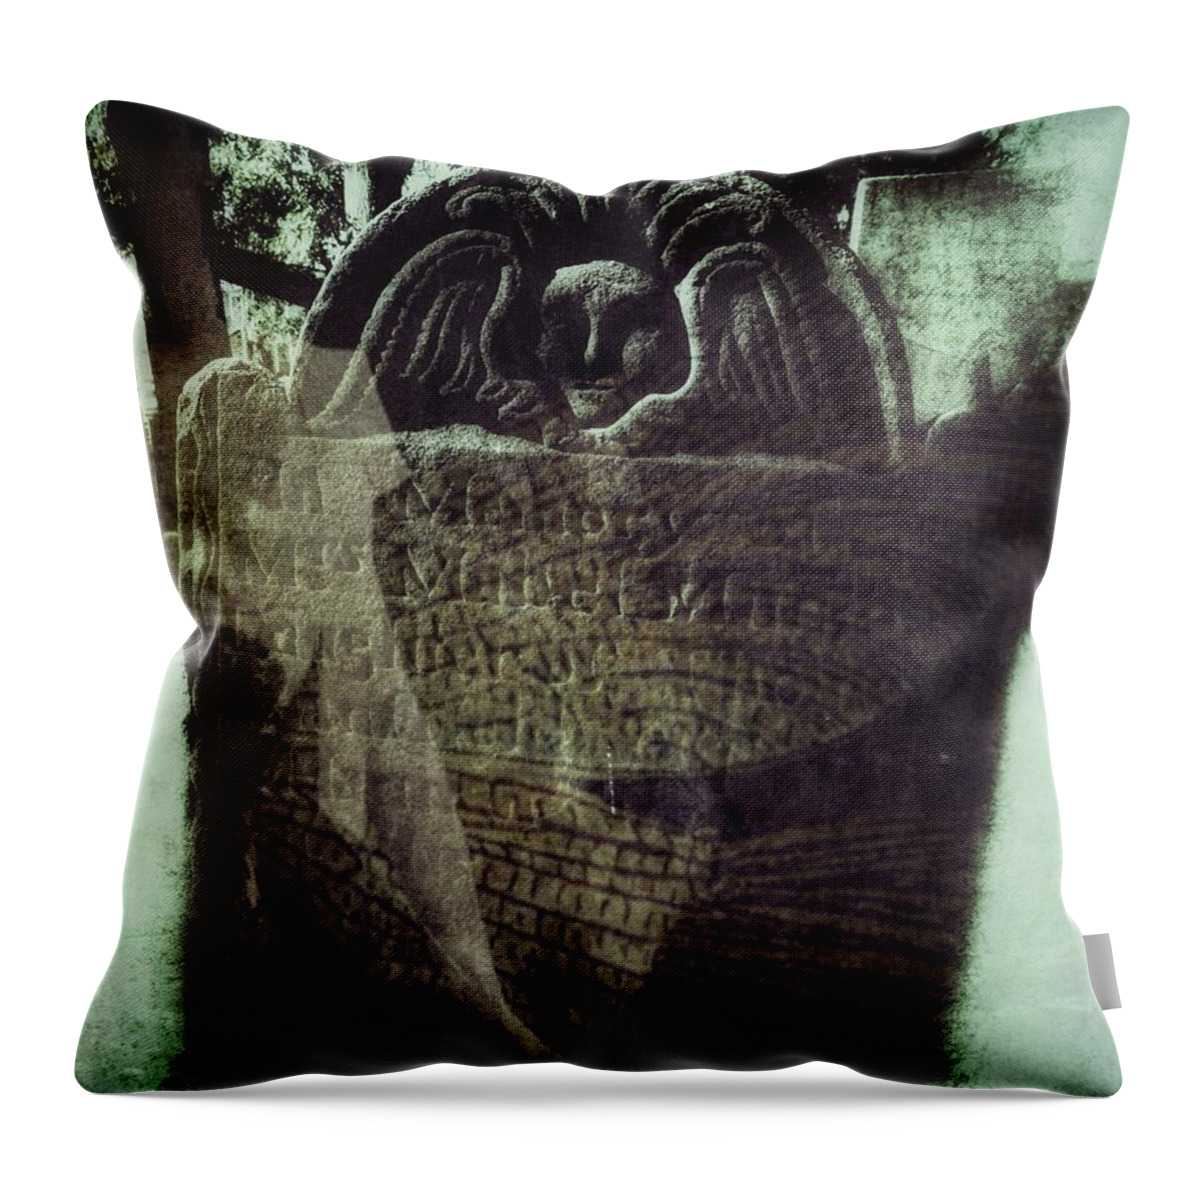 Old New England Cemetery Throw Pillow featuring the digital art Fairies by Delight Worthyn